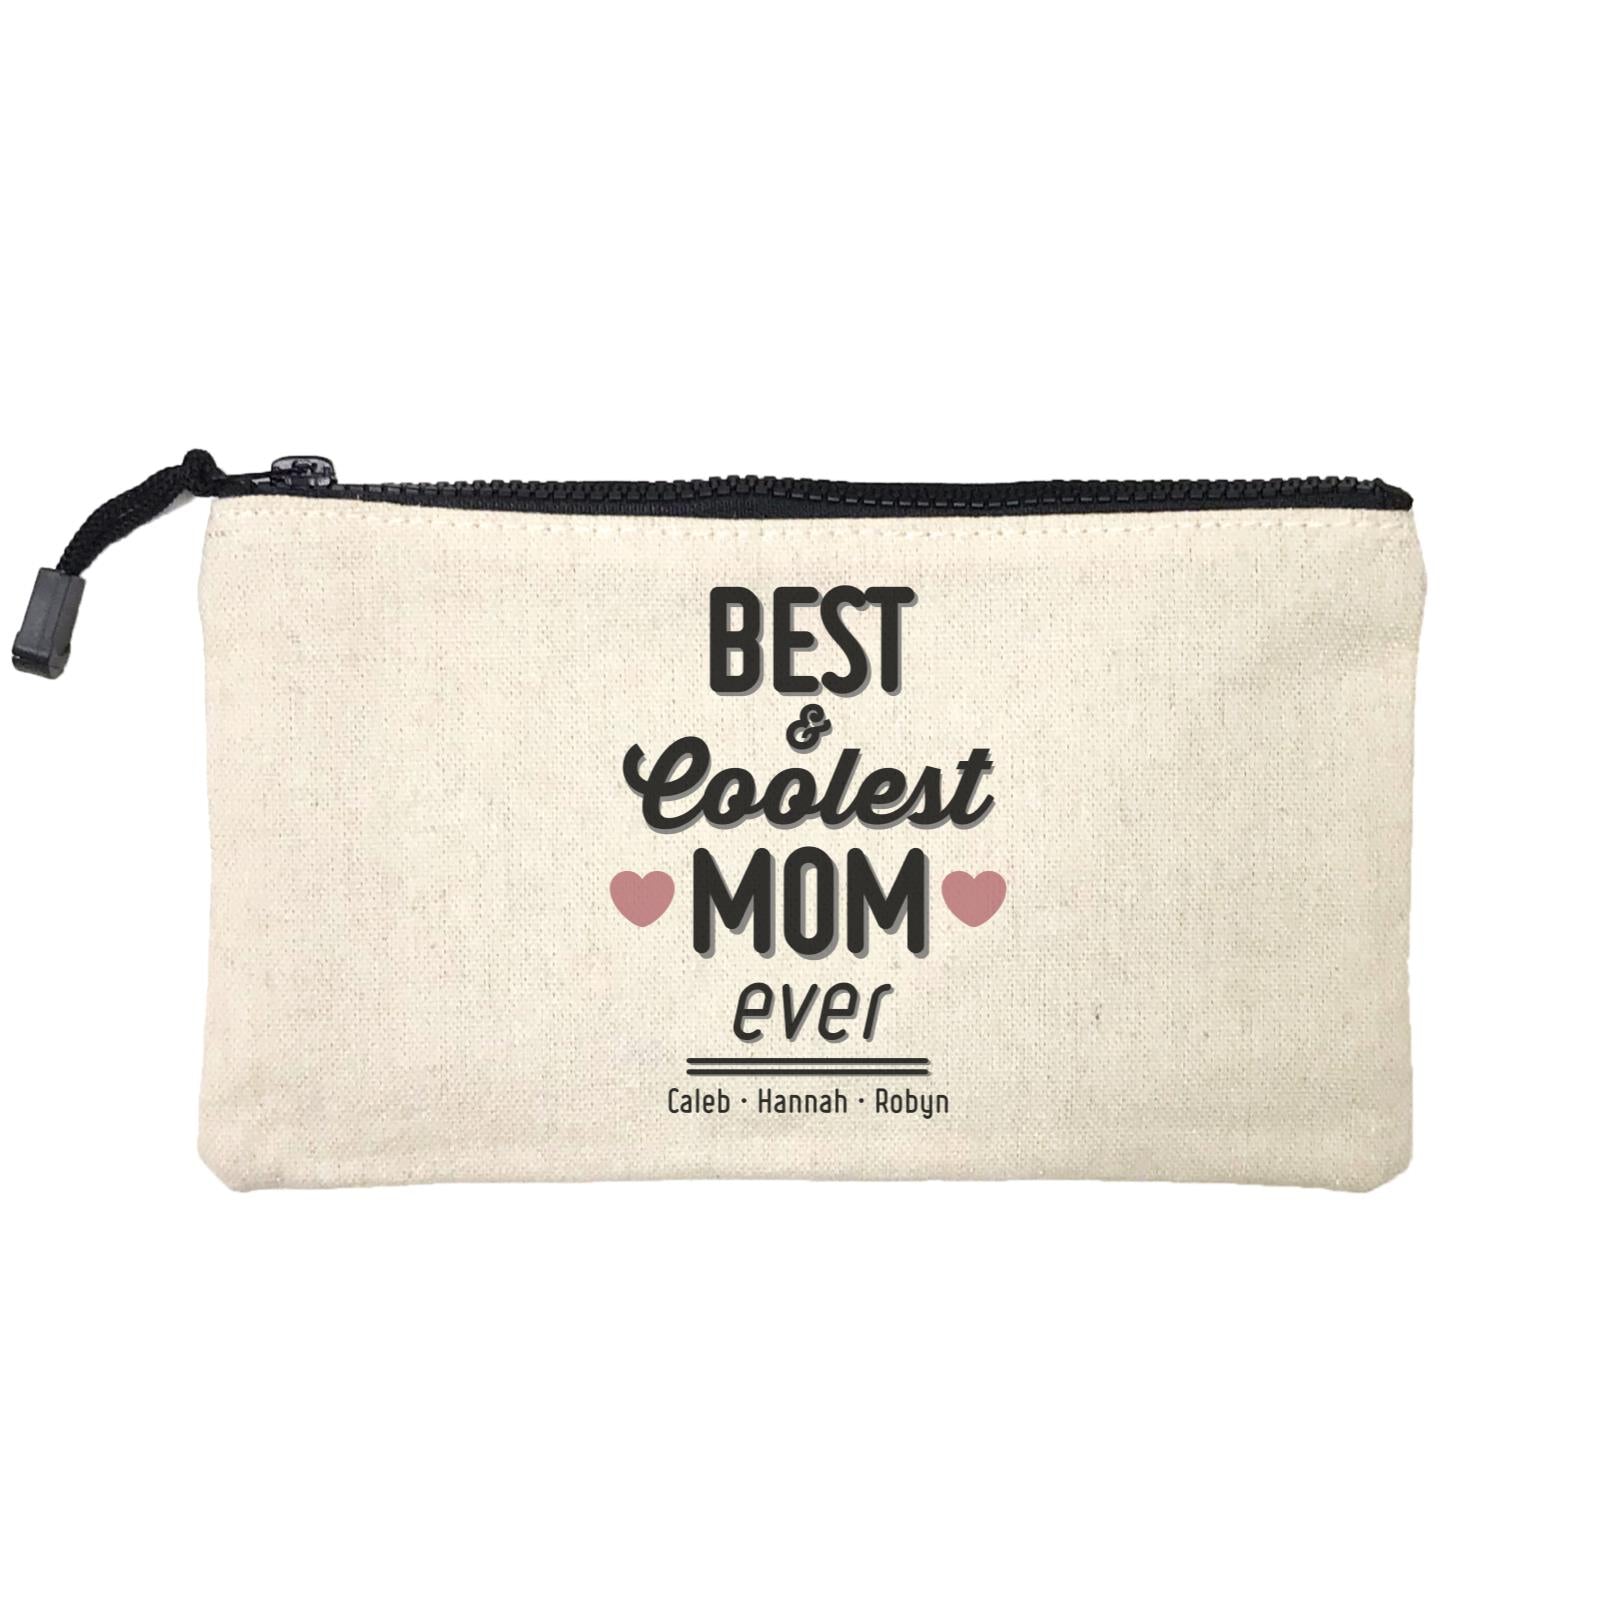 Best & Coolest Mom Ever Addname Mini Accessories Stationery Pouch